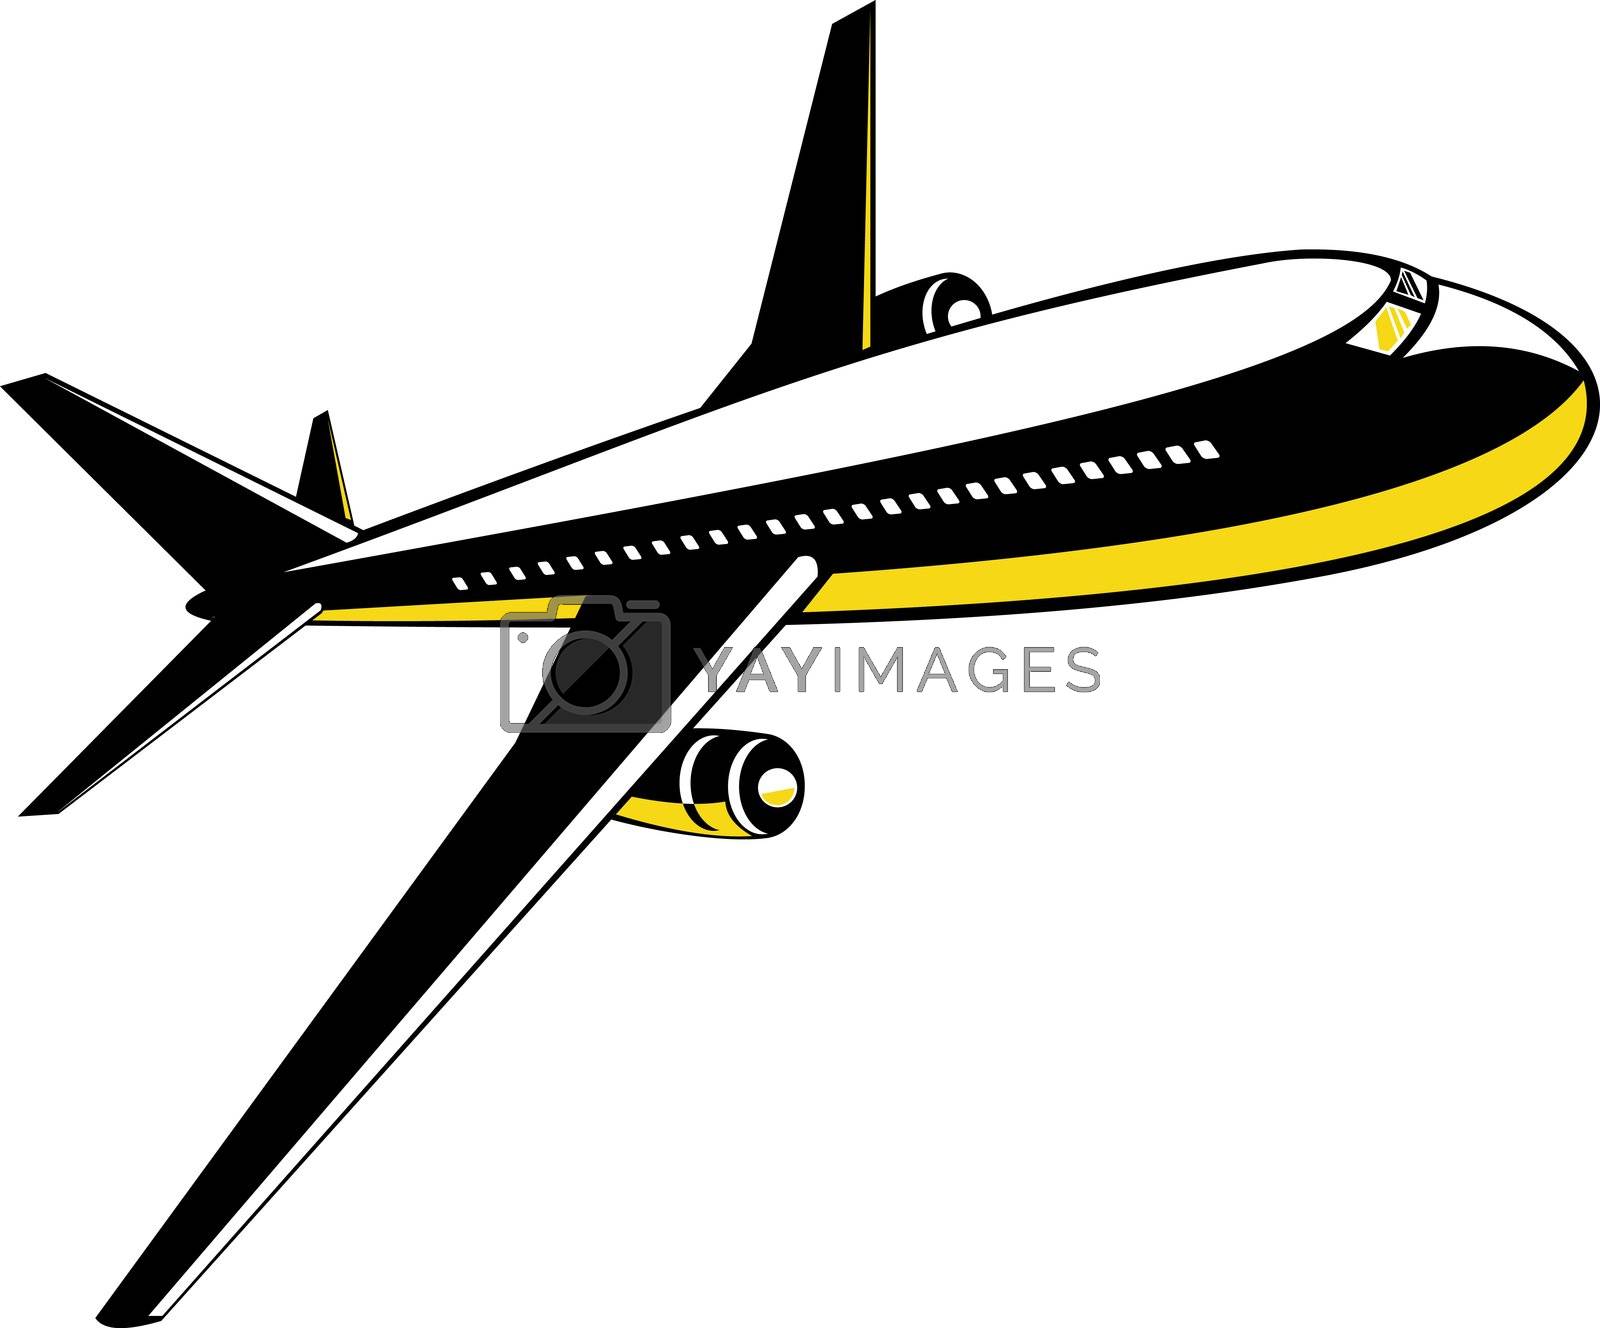 Royalty free image of commercial jet plane airliner flying by patrimonio